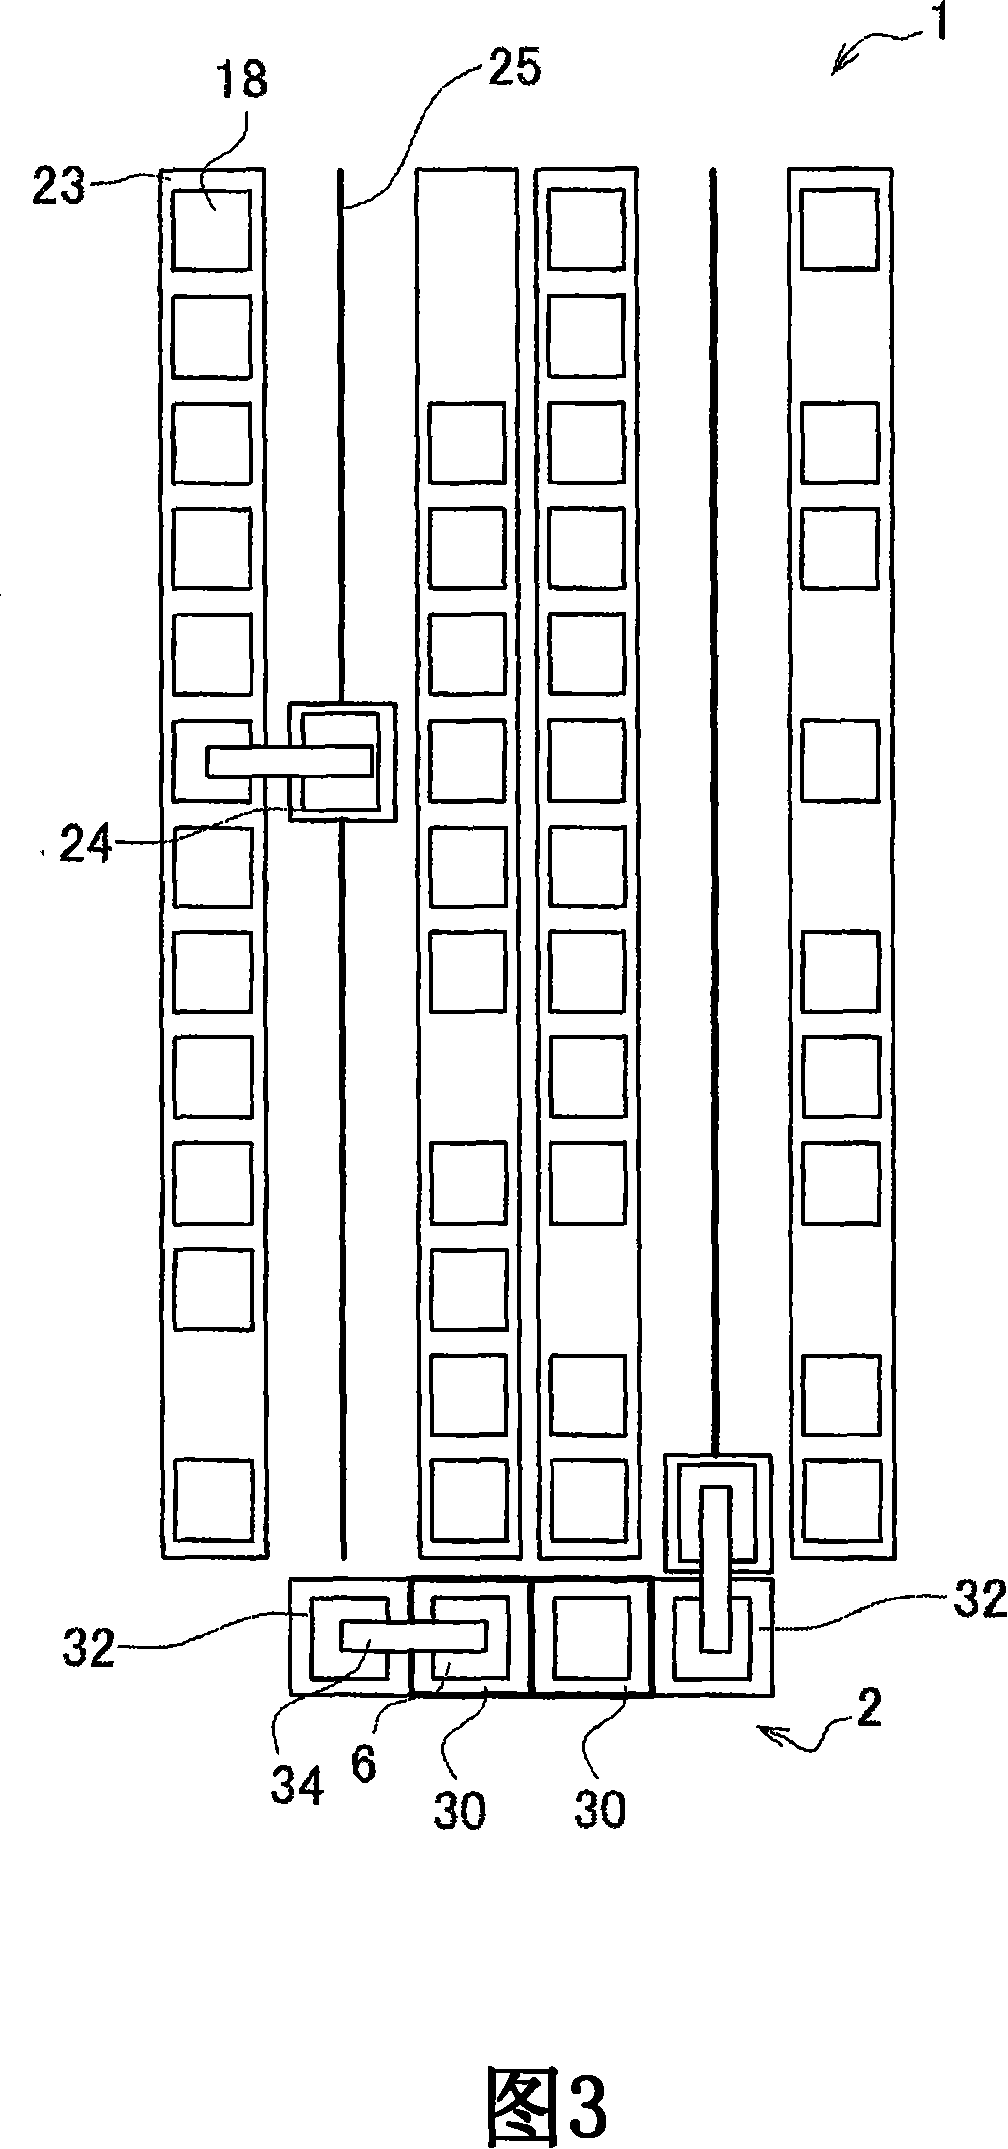 Article storing device